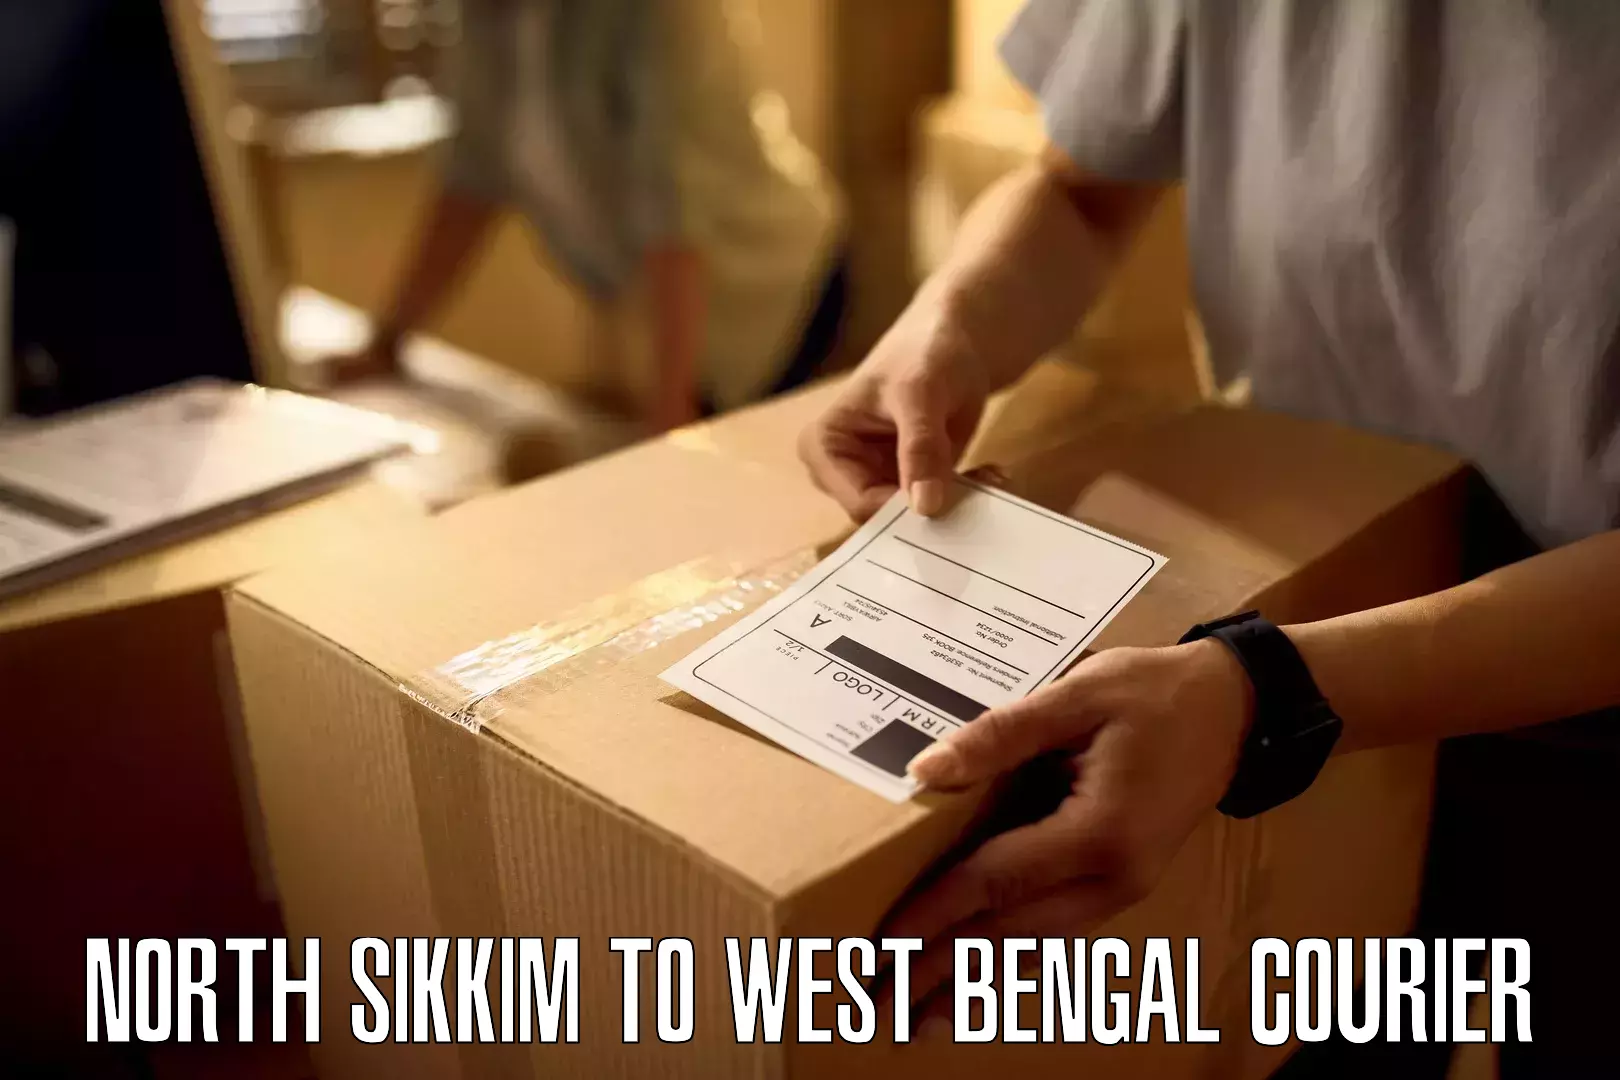 Delivery service partnership North Sikkim to West Bengal